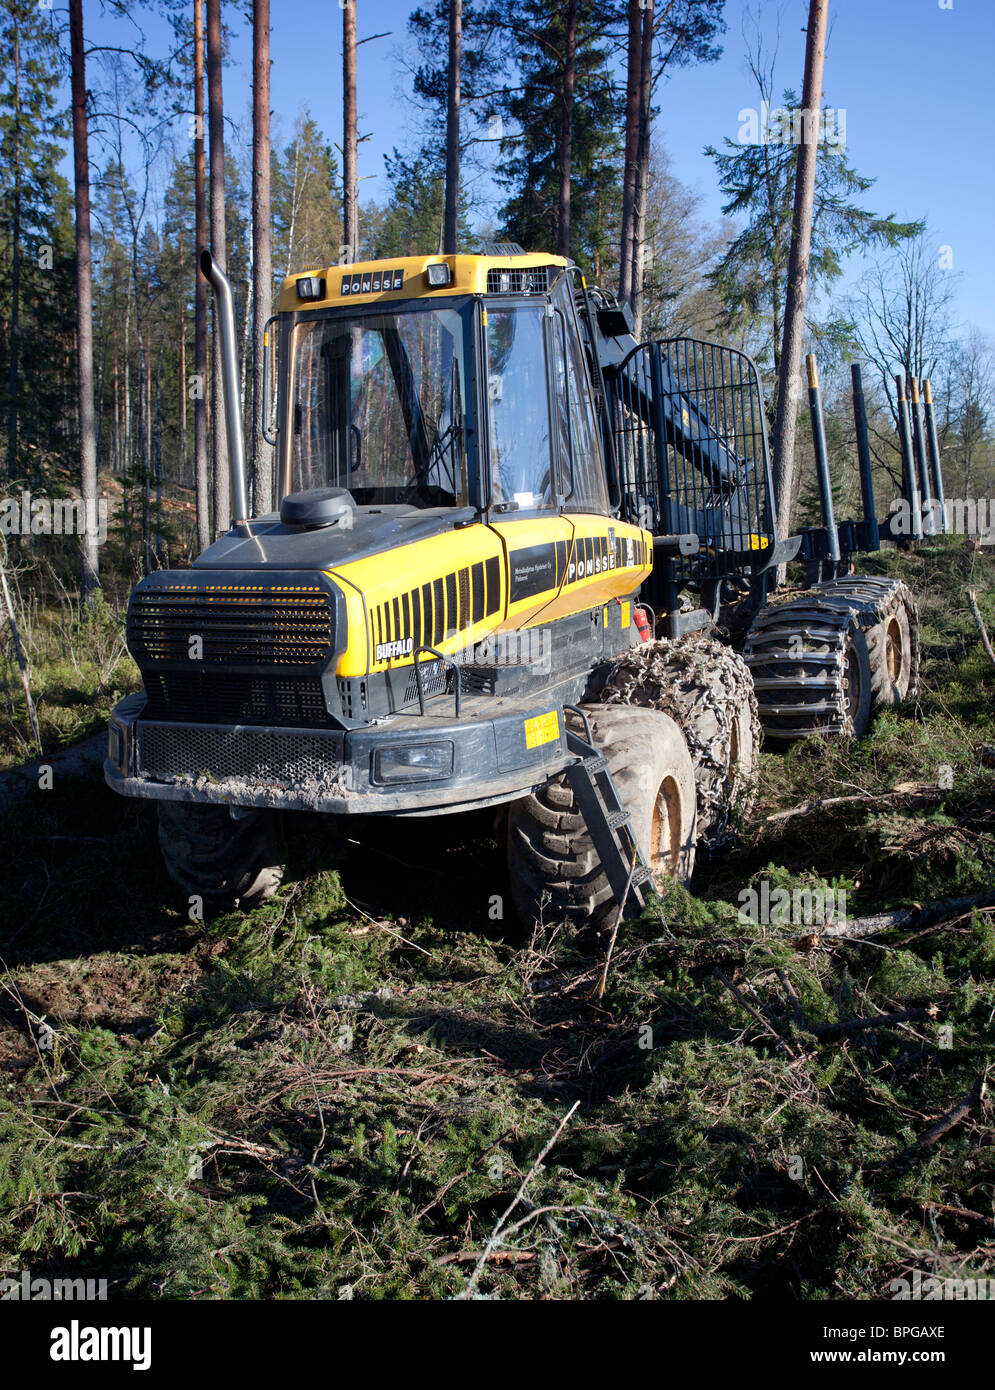 Ponsse Buffalo forwarder forestry vehicle at clear-cutting area Stock Photo  - Alamy